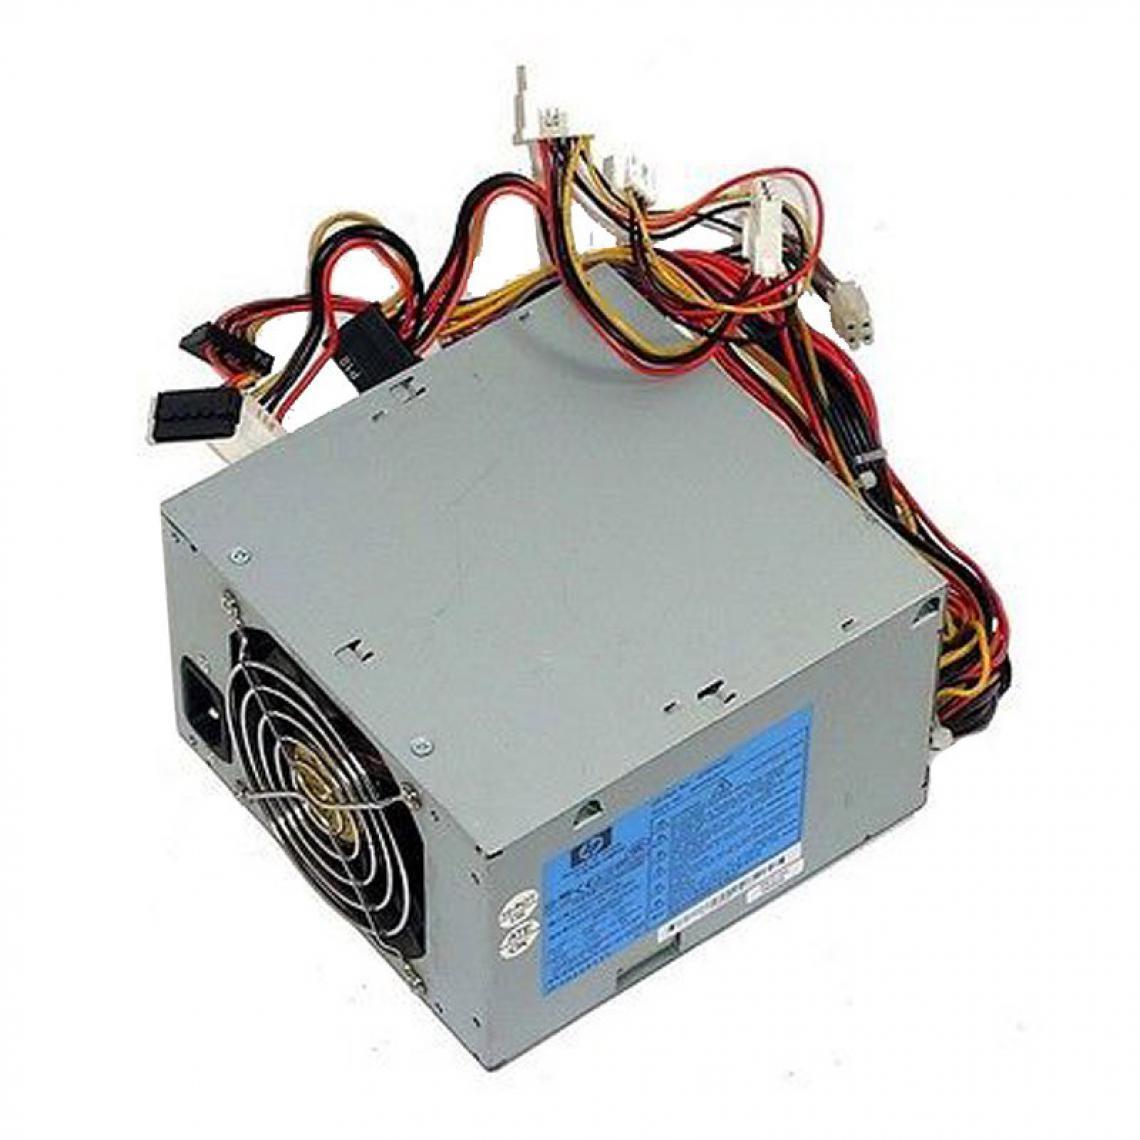 Hp - Alimentation HP PS-6361-4HF 250W 381023-001 379294-001 DC7600 MT - Alimentation modulaire